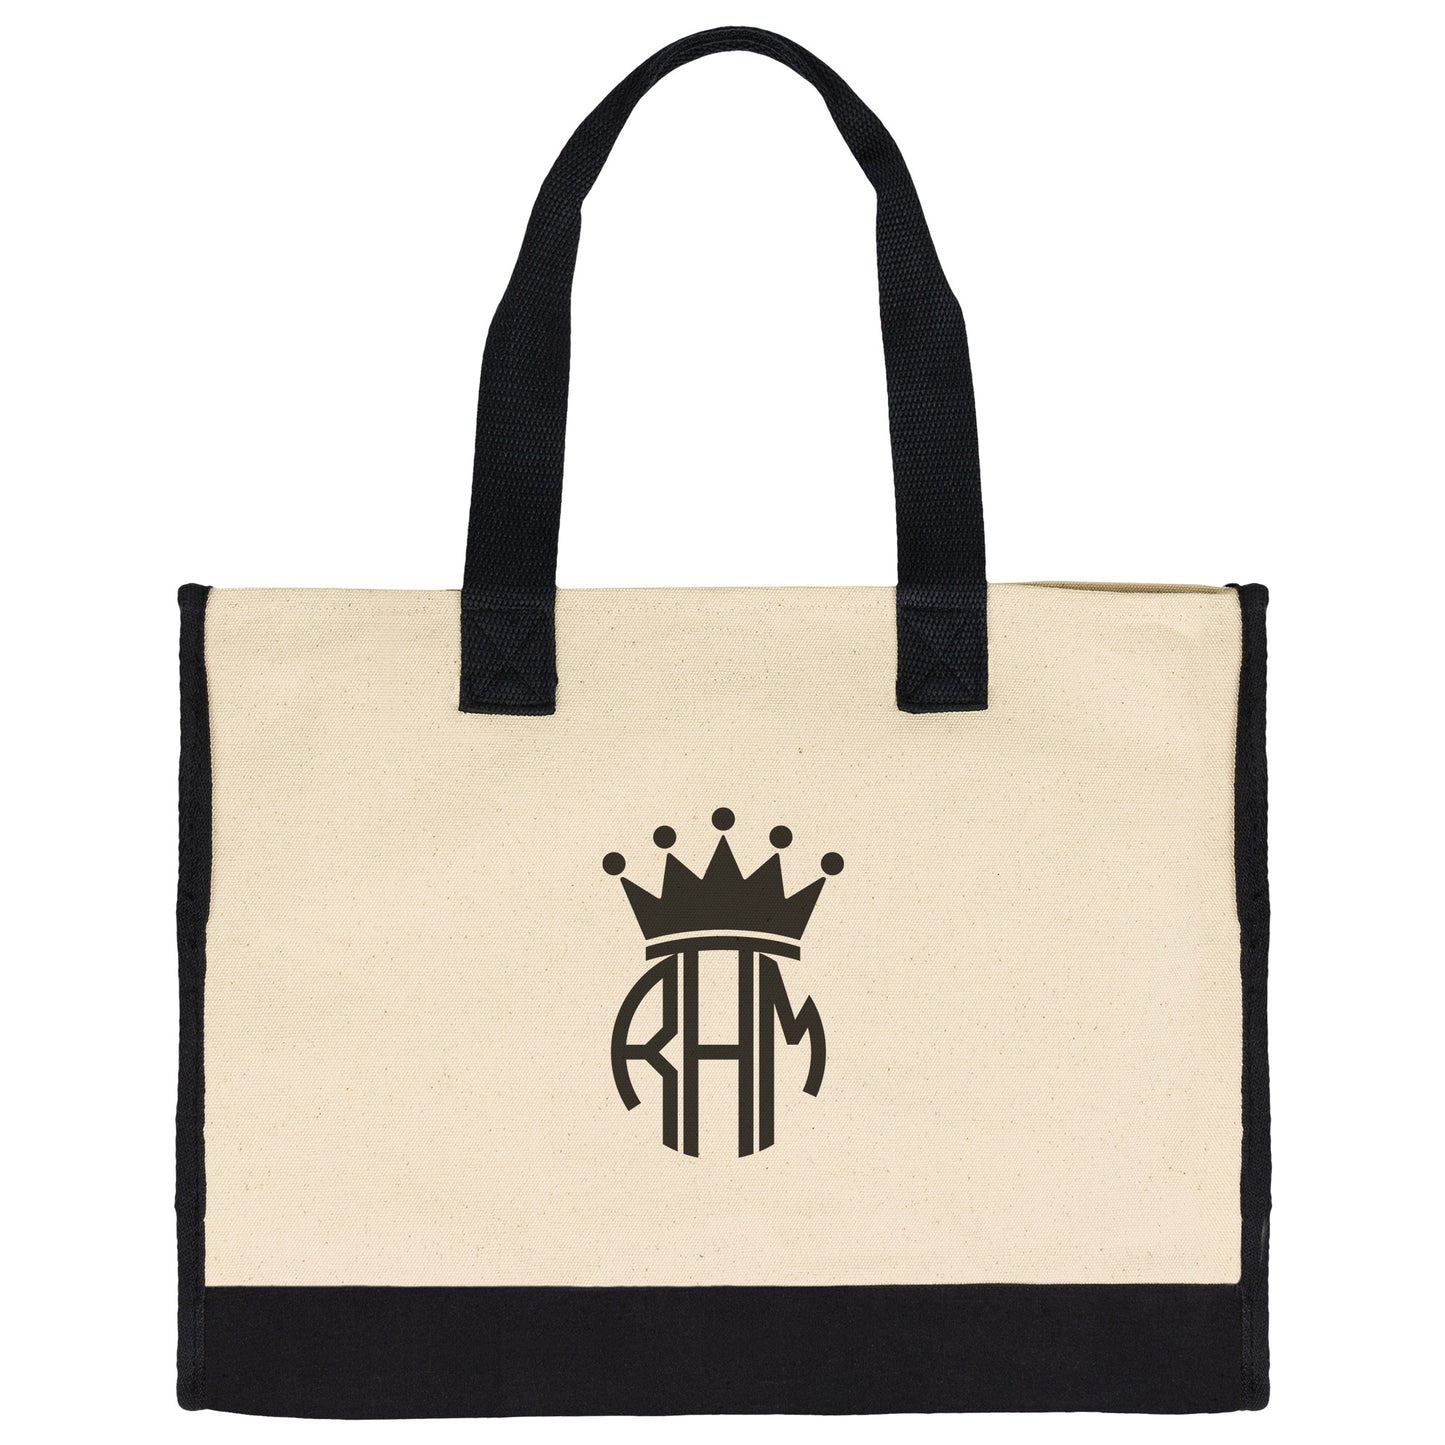 Crown Custom Monogram Tote Bag 100% Cotton Canvas Must-Have Personalized Tote Bag, Carry-on Bag, Mother's Day Gift, Beach Bag, Bridesmaid Bag, Gift for Her